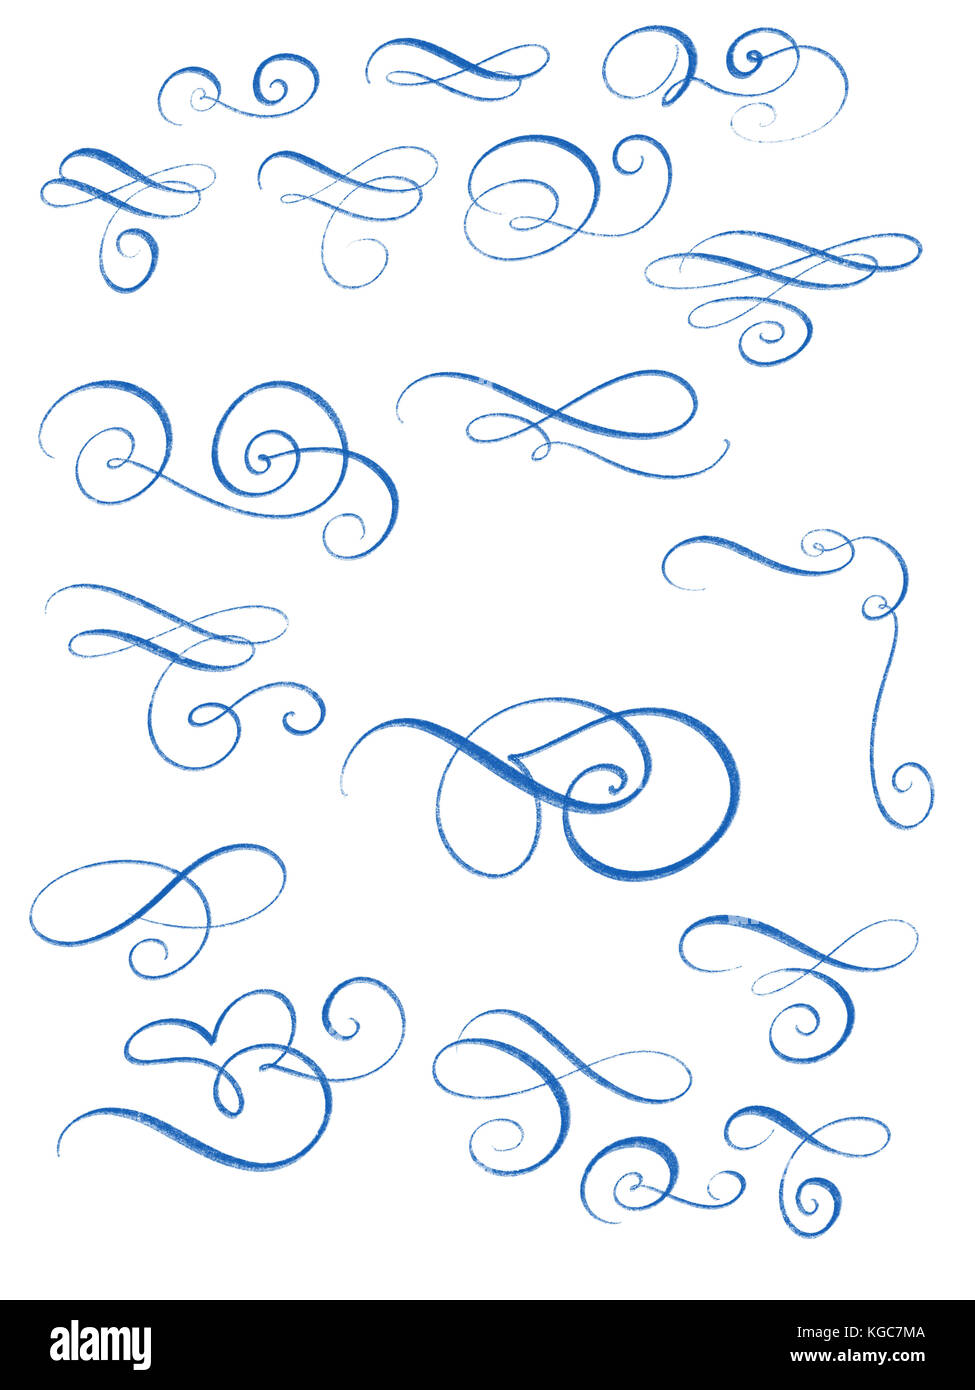 Collection or set of vintage styled calligraphic flourishes Stock Photo